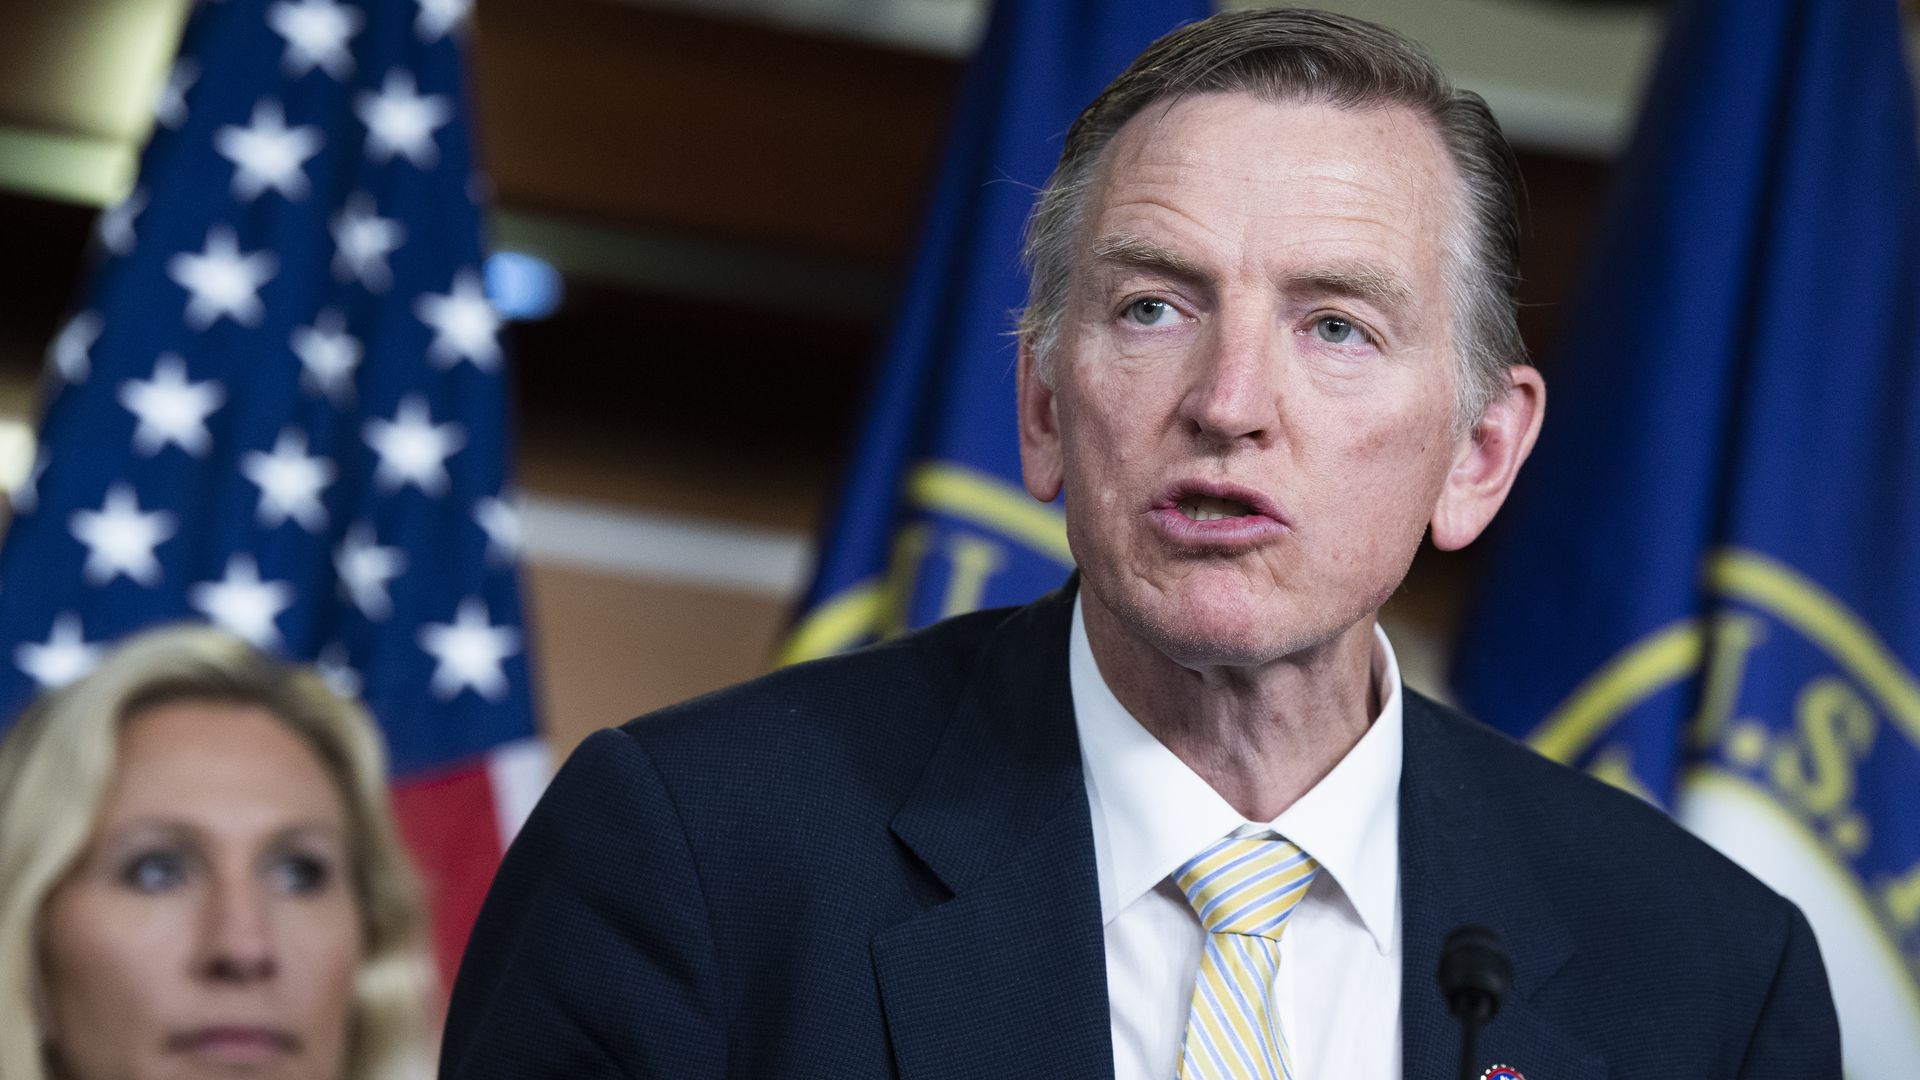 Rep. Paul Gosar (R-Ariz.) during a news conference on June 15.